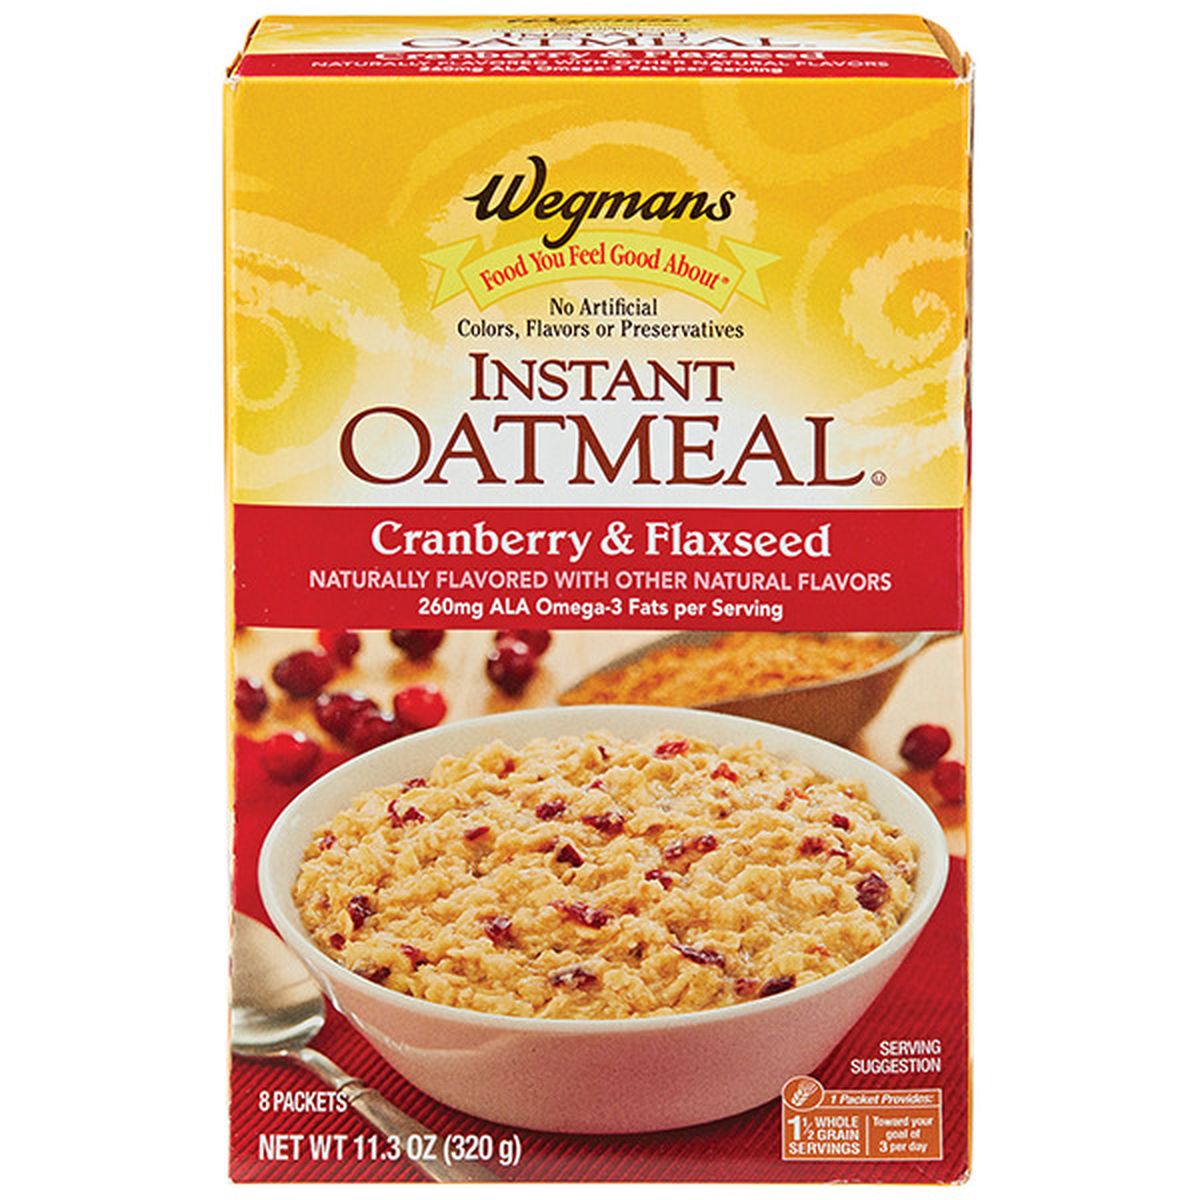 Calories in Wegmans Cranberry & Flaxseed Instant Oatmeal, 8 Packets